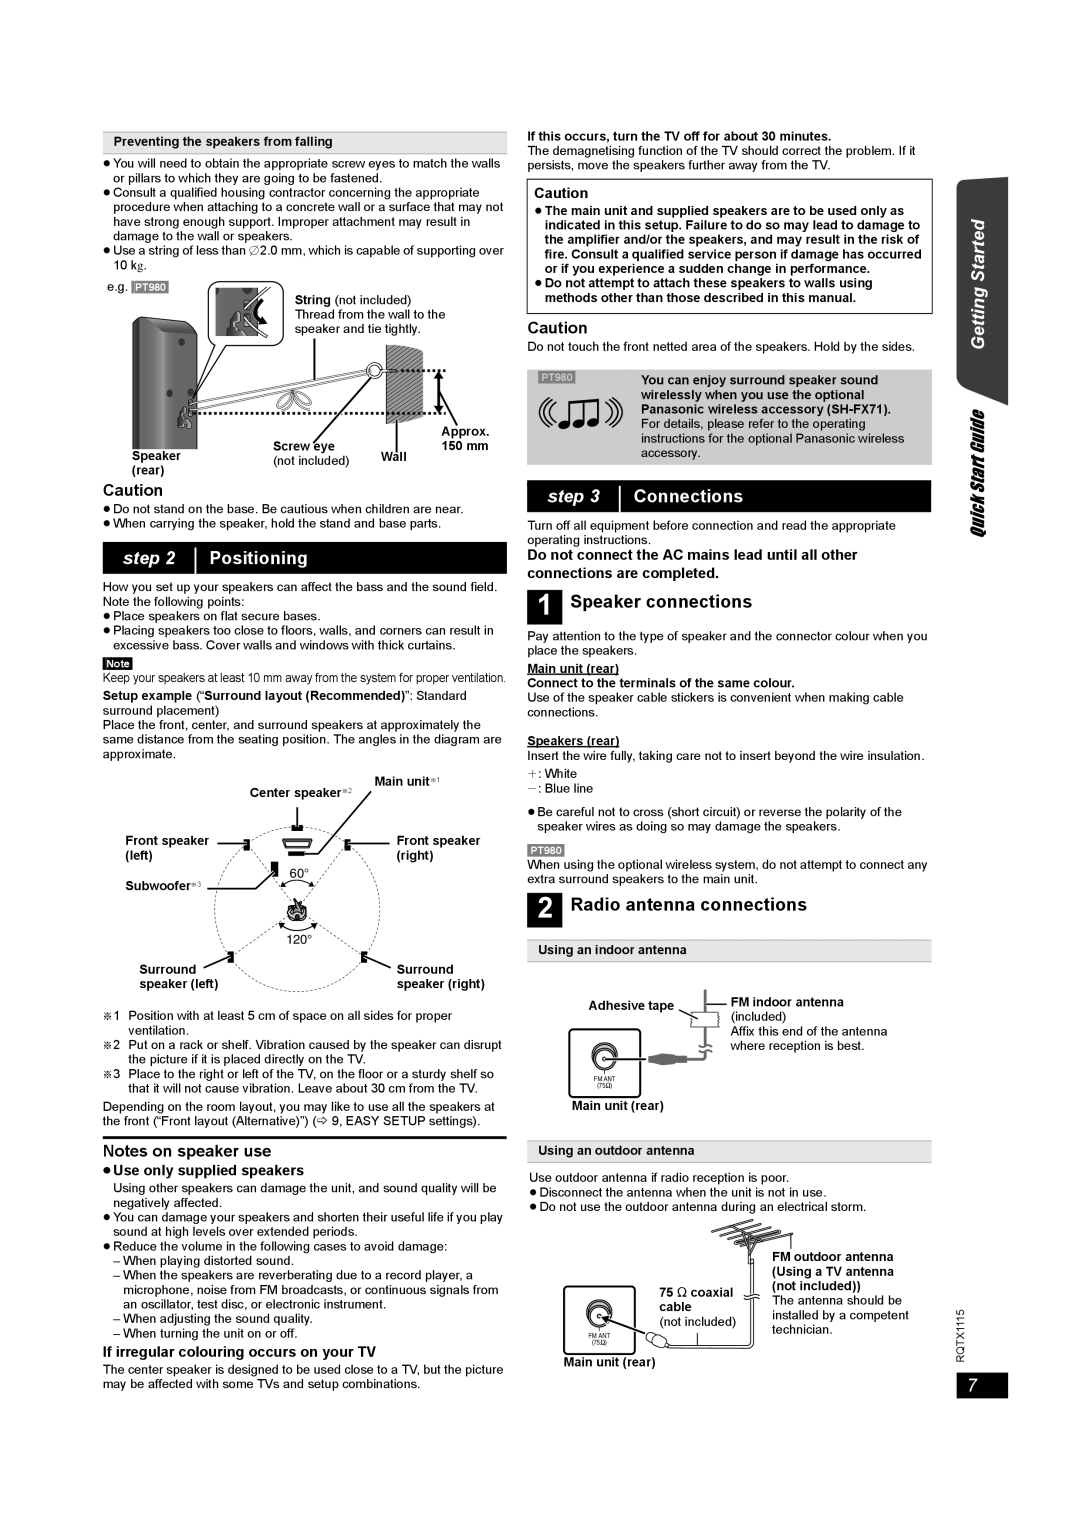 Panasonic SC-PT980 Positioning, Connections, Speaker connections, Radio antenna connections, Notes on speaker use, step 